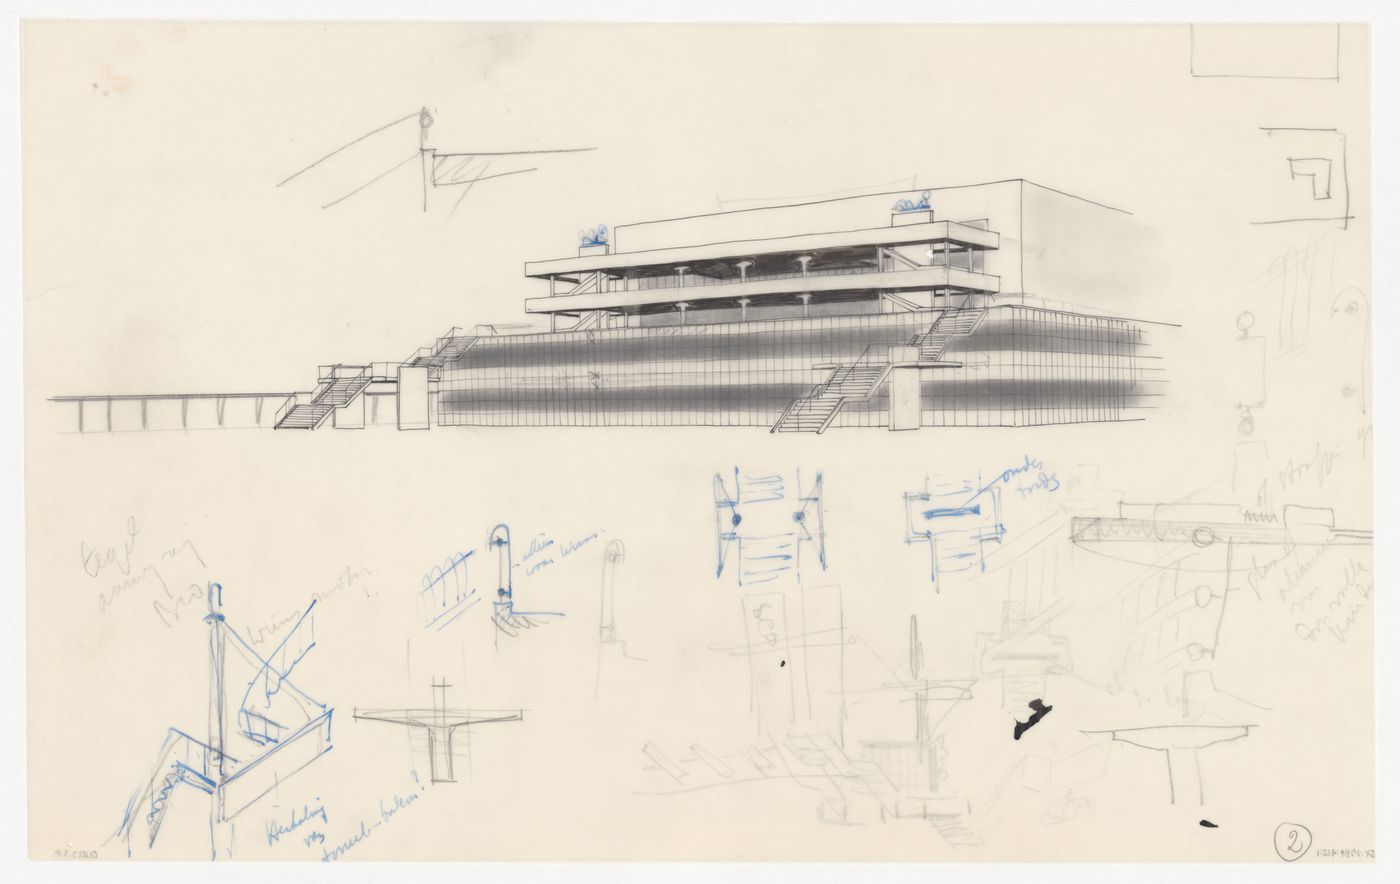 South perspective and sectional details for stairs for the Congress Hall Complex, The Hague, Netherlands